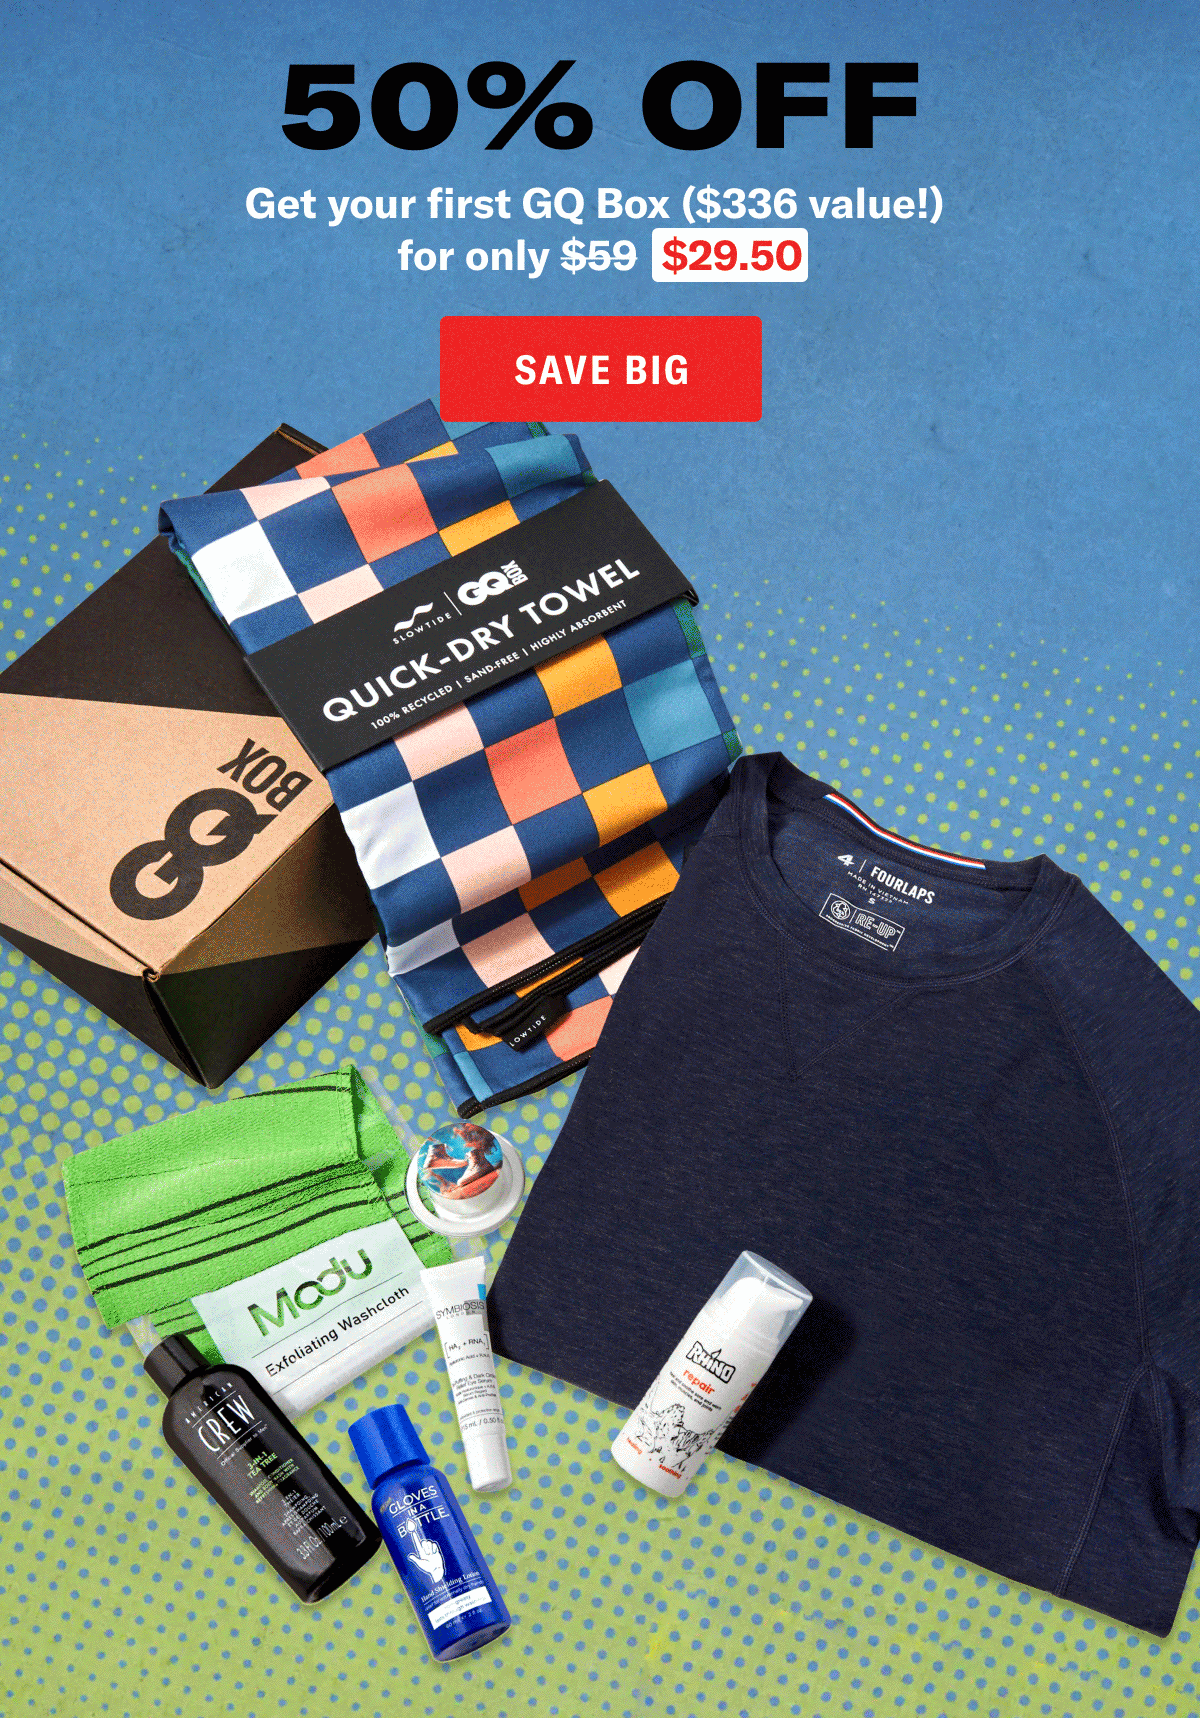 The Spring Box. 50% off. Save big. Get your first GQ Box (\\$336 value!) for only \\$29.50. Save big.